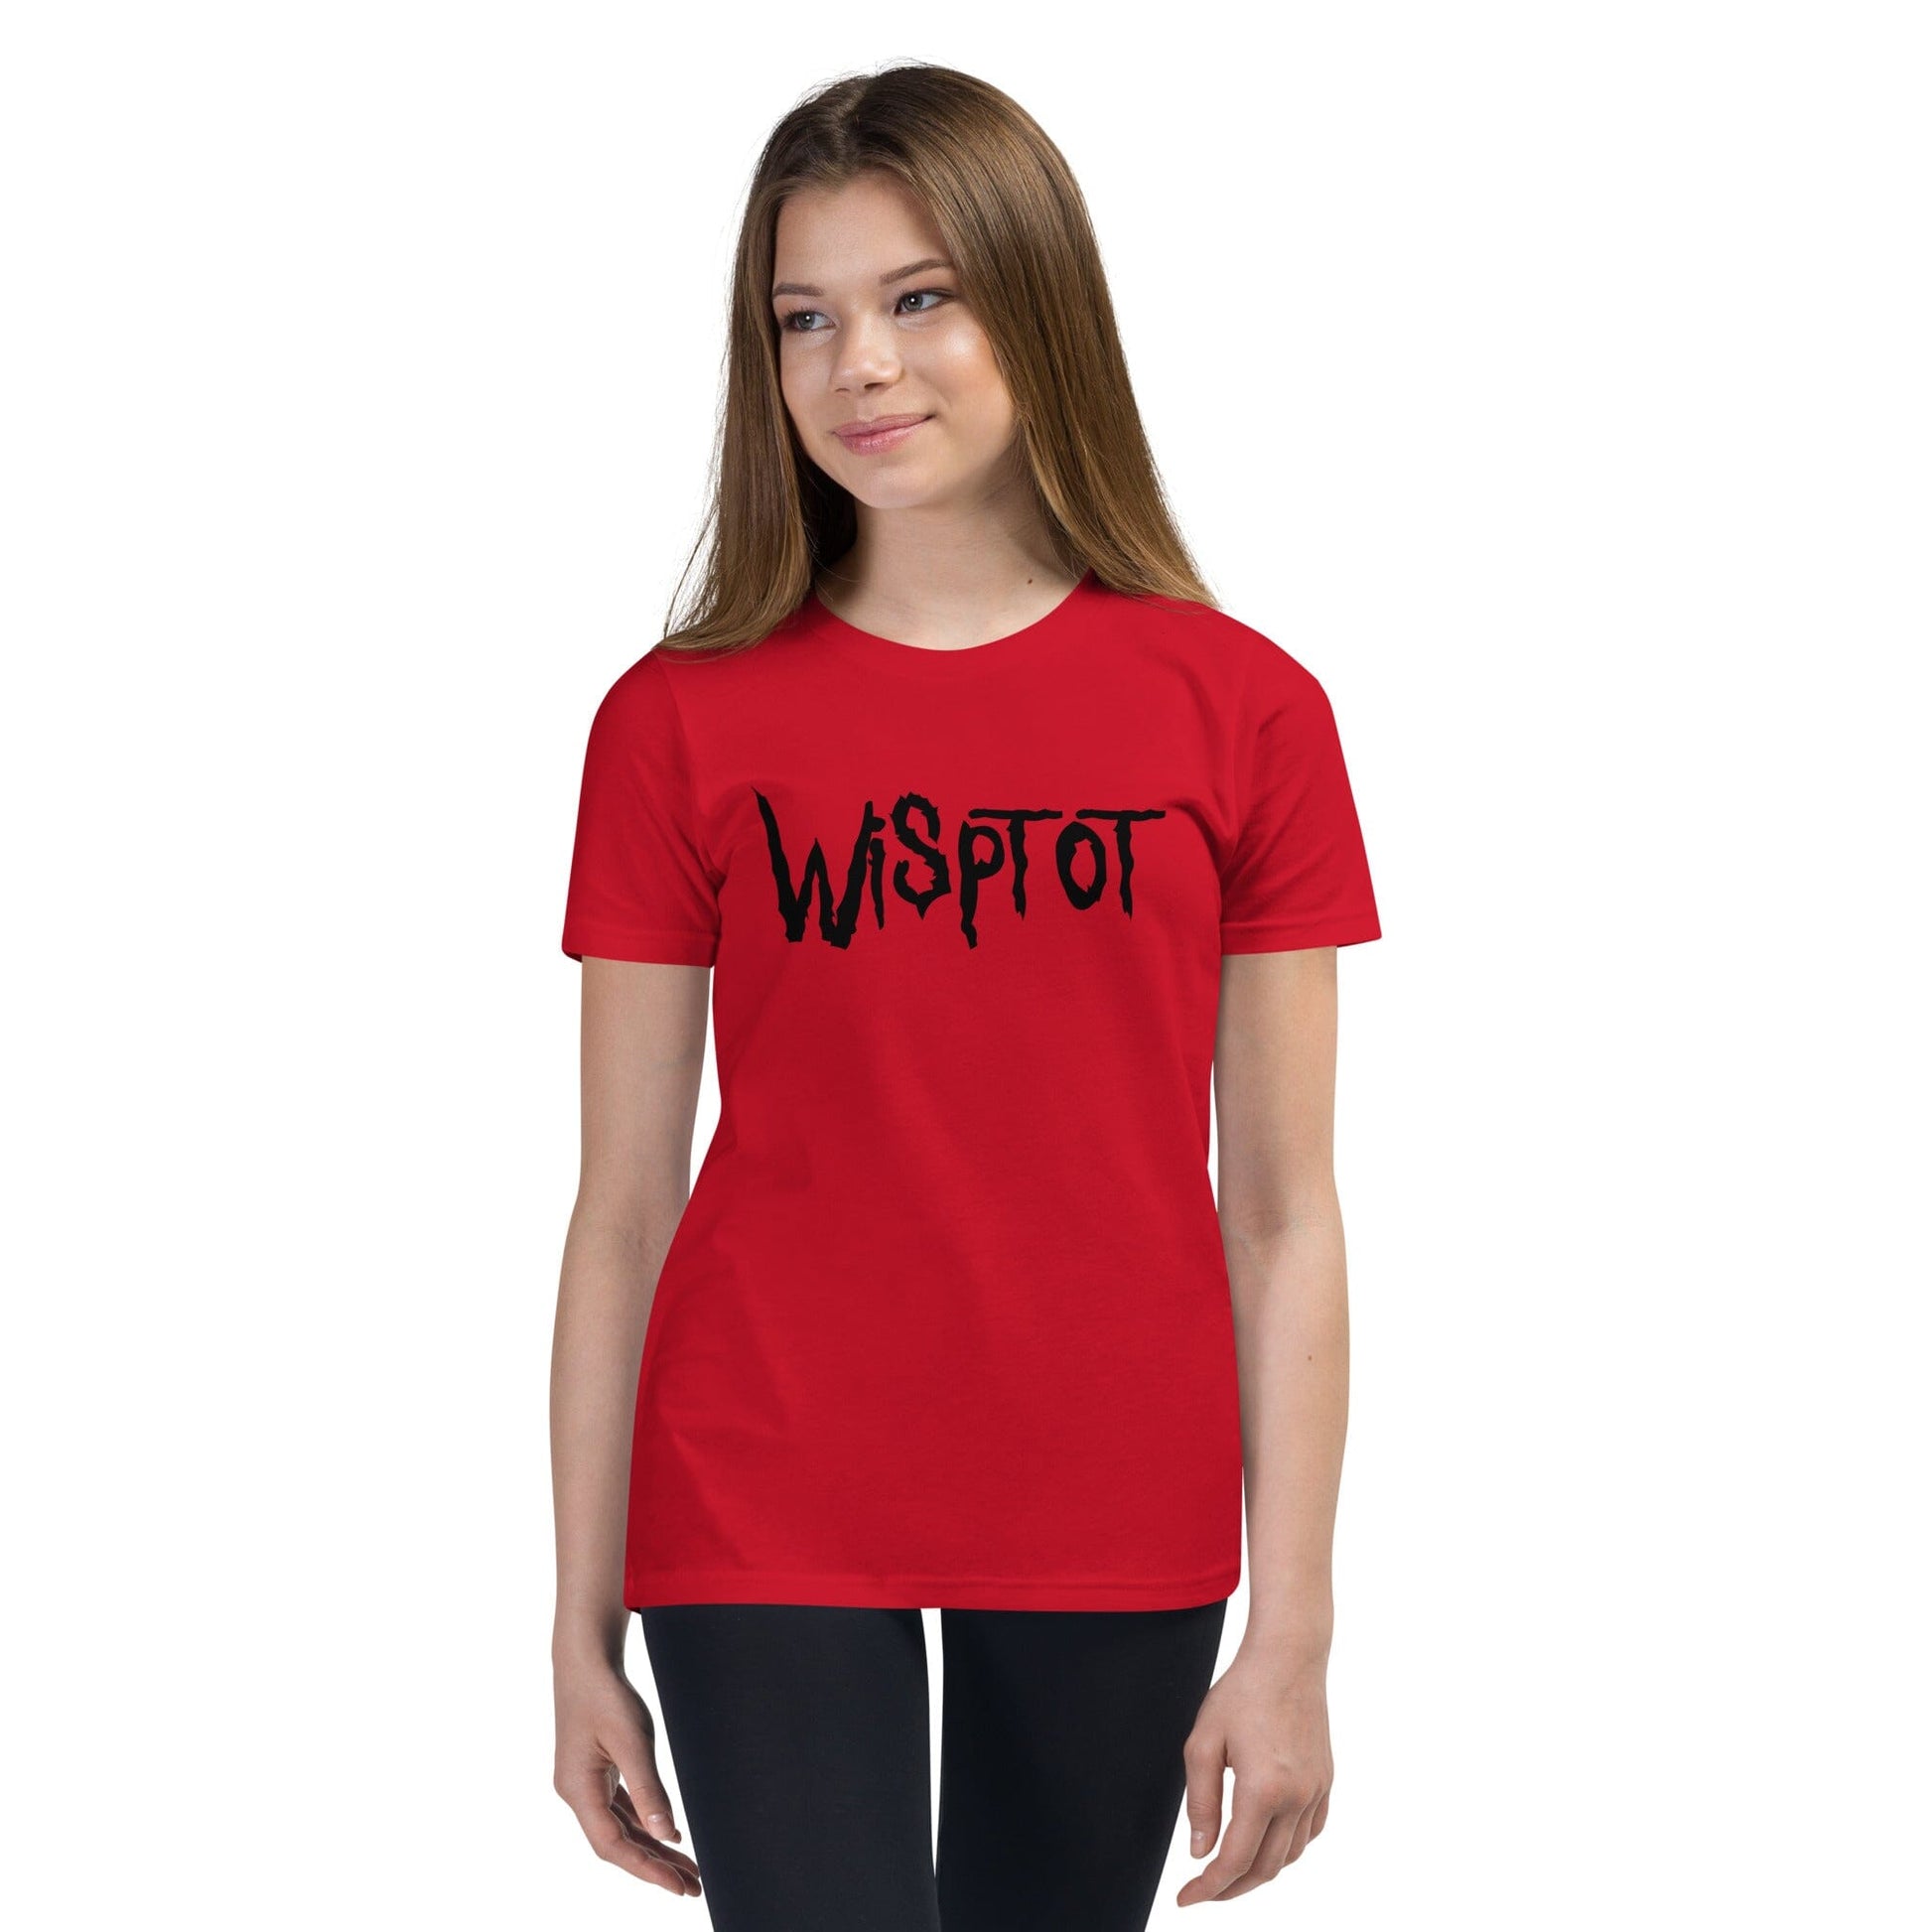 WispTot YOUTH T-Shirt [Unfoiled] (All net proceeds go to equally to Kitty CrusAIDe and Rags to Riches Animal Rescue) JoyousJoyfulJoyness Red S 